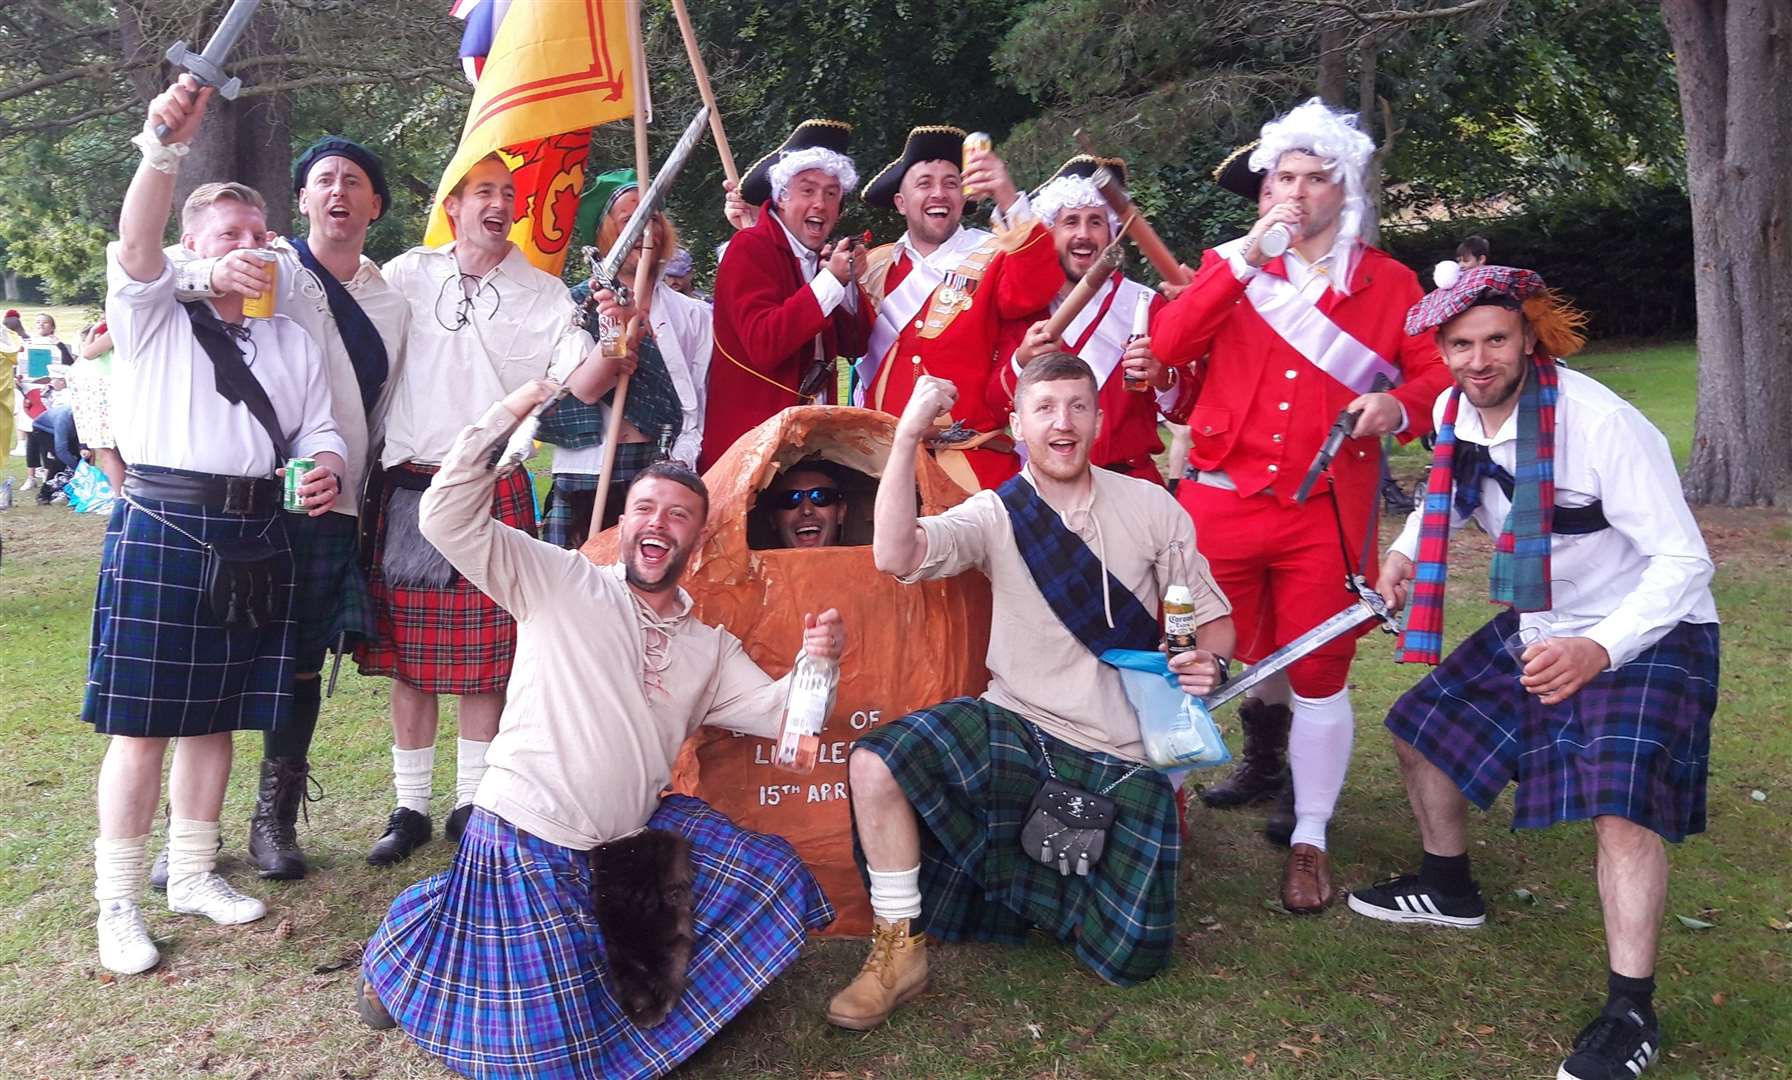 The Battle of Littleferry fancy dress group won the best dressed title.